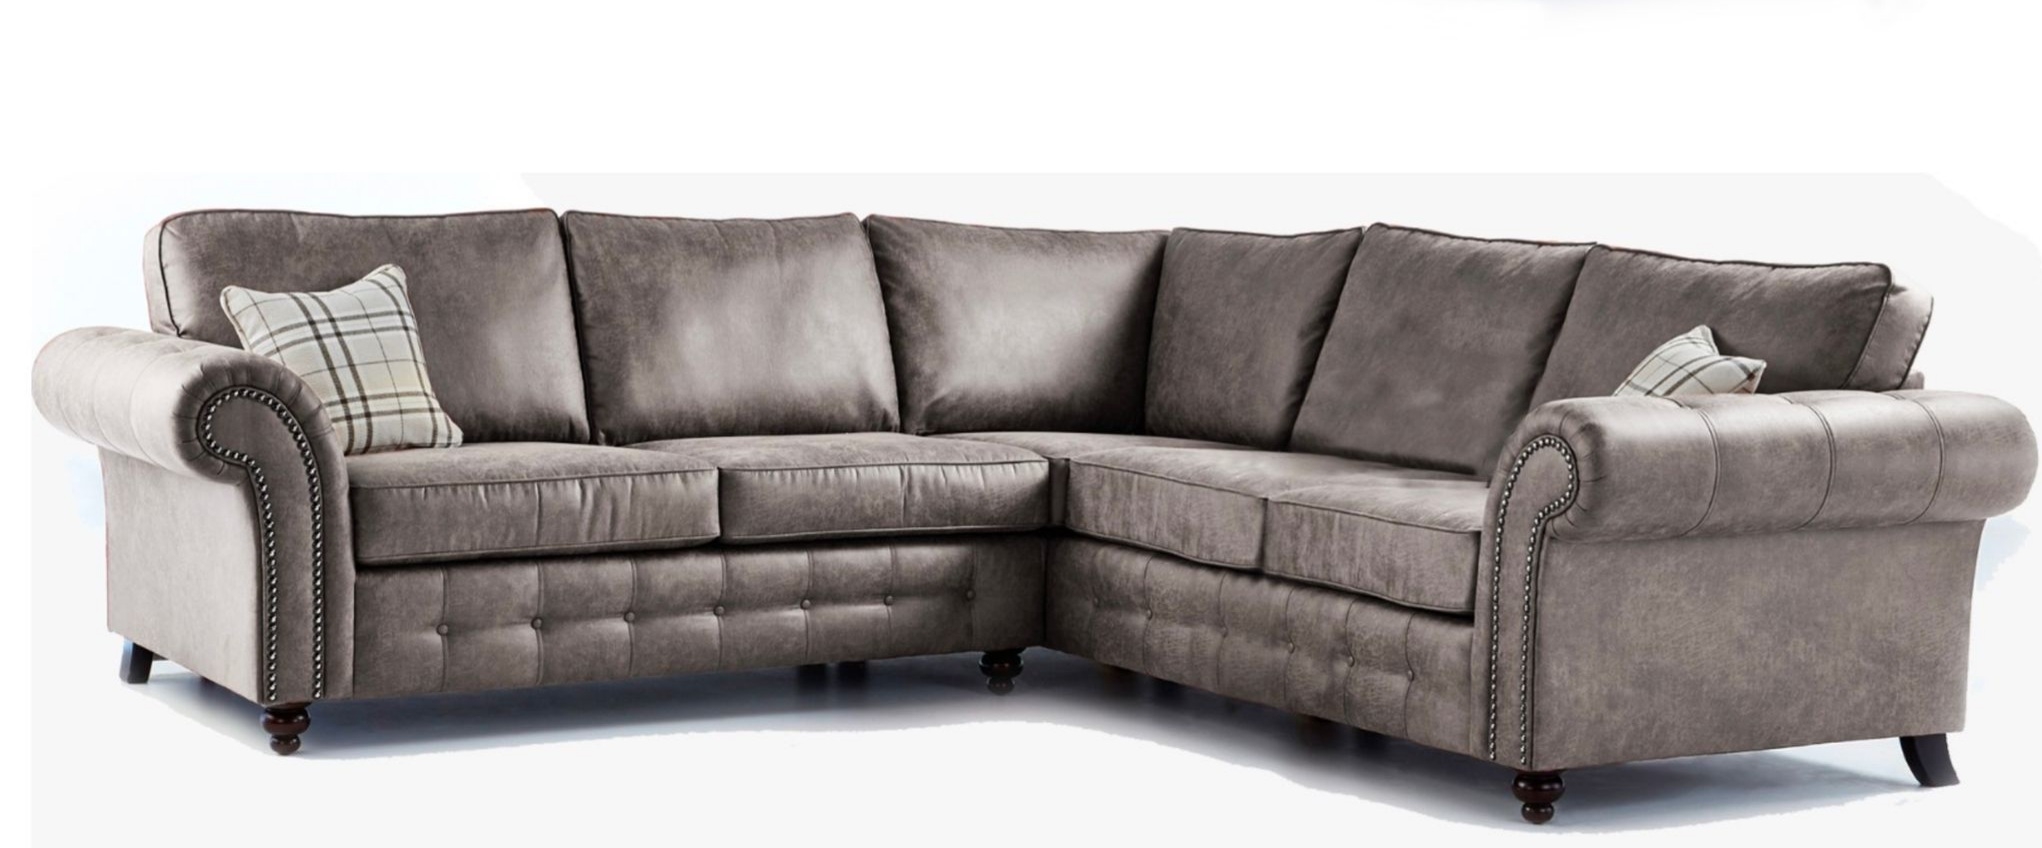 Oakland Leather 5 Seater Corner Sofa – Charcoal Grey – The Online Sofa Shop